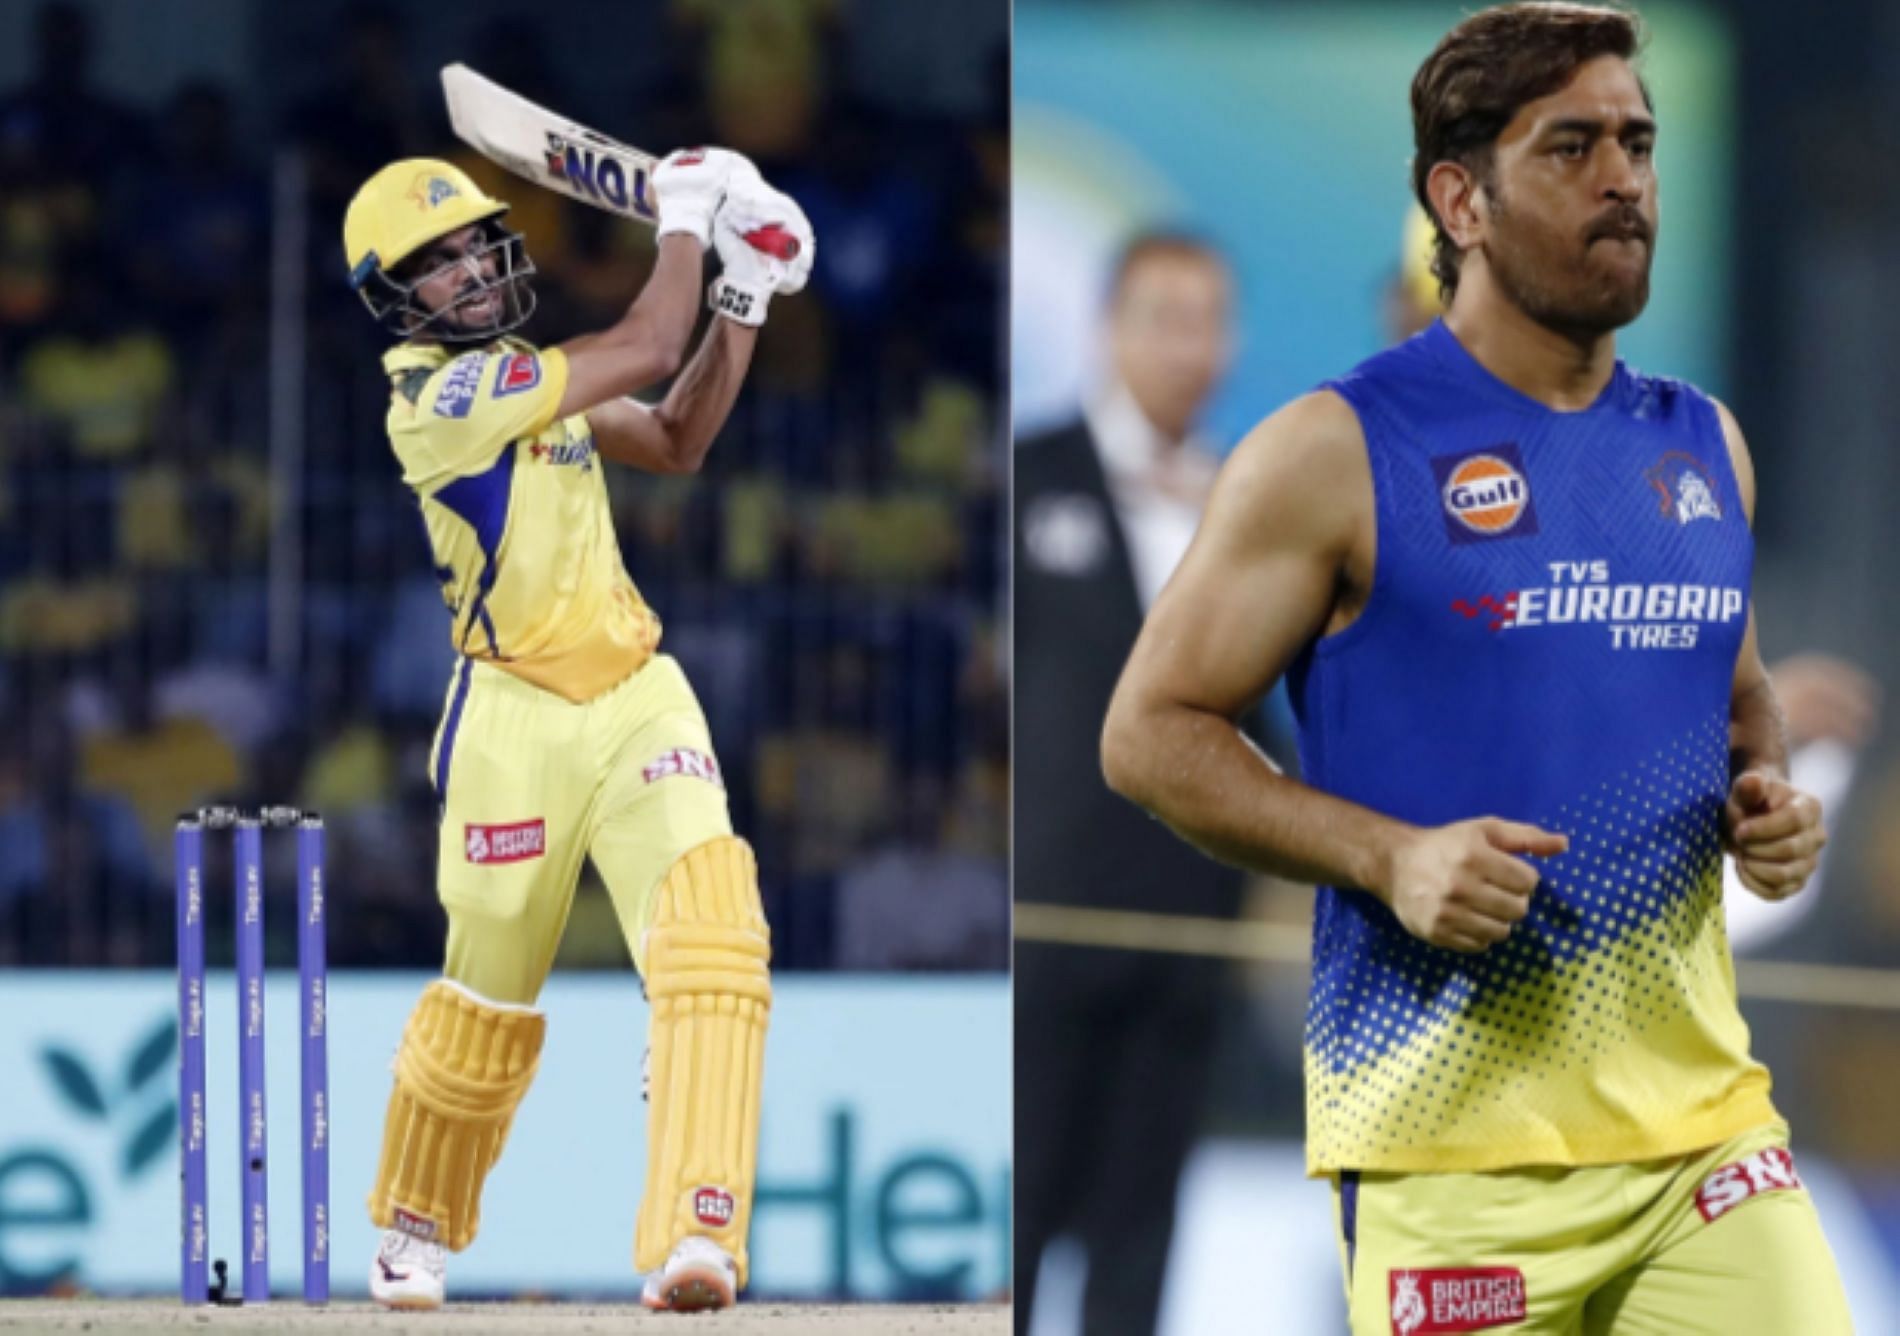 Gaikwad took over from Dhoni as CSK captain this season